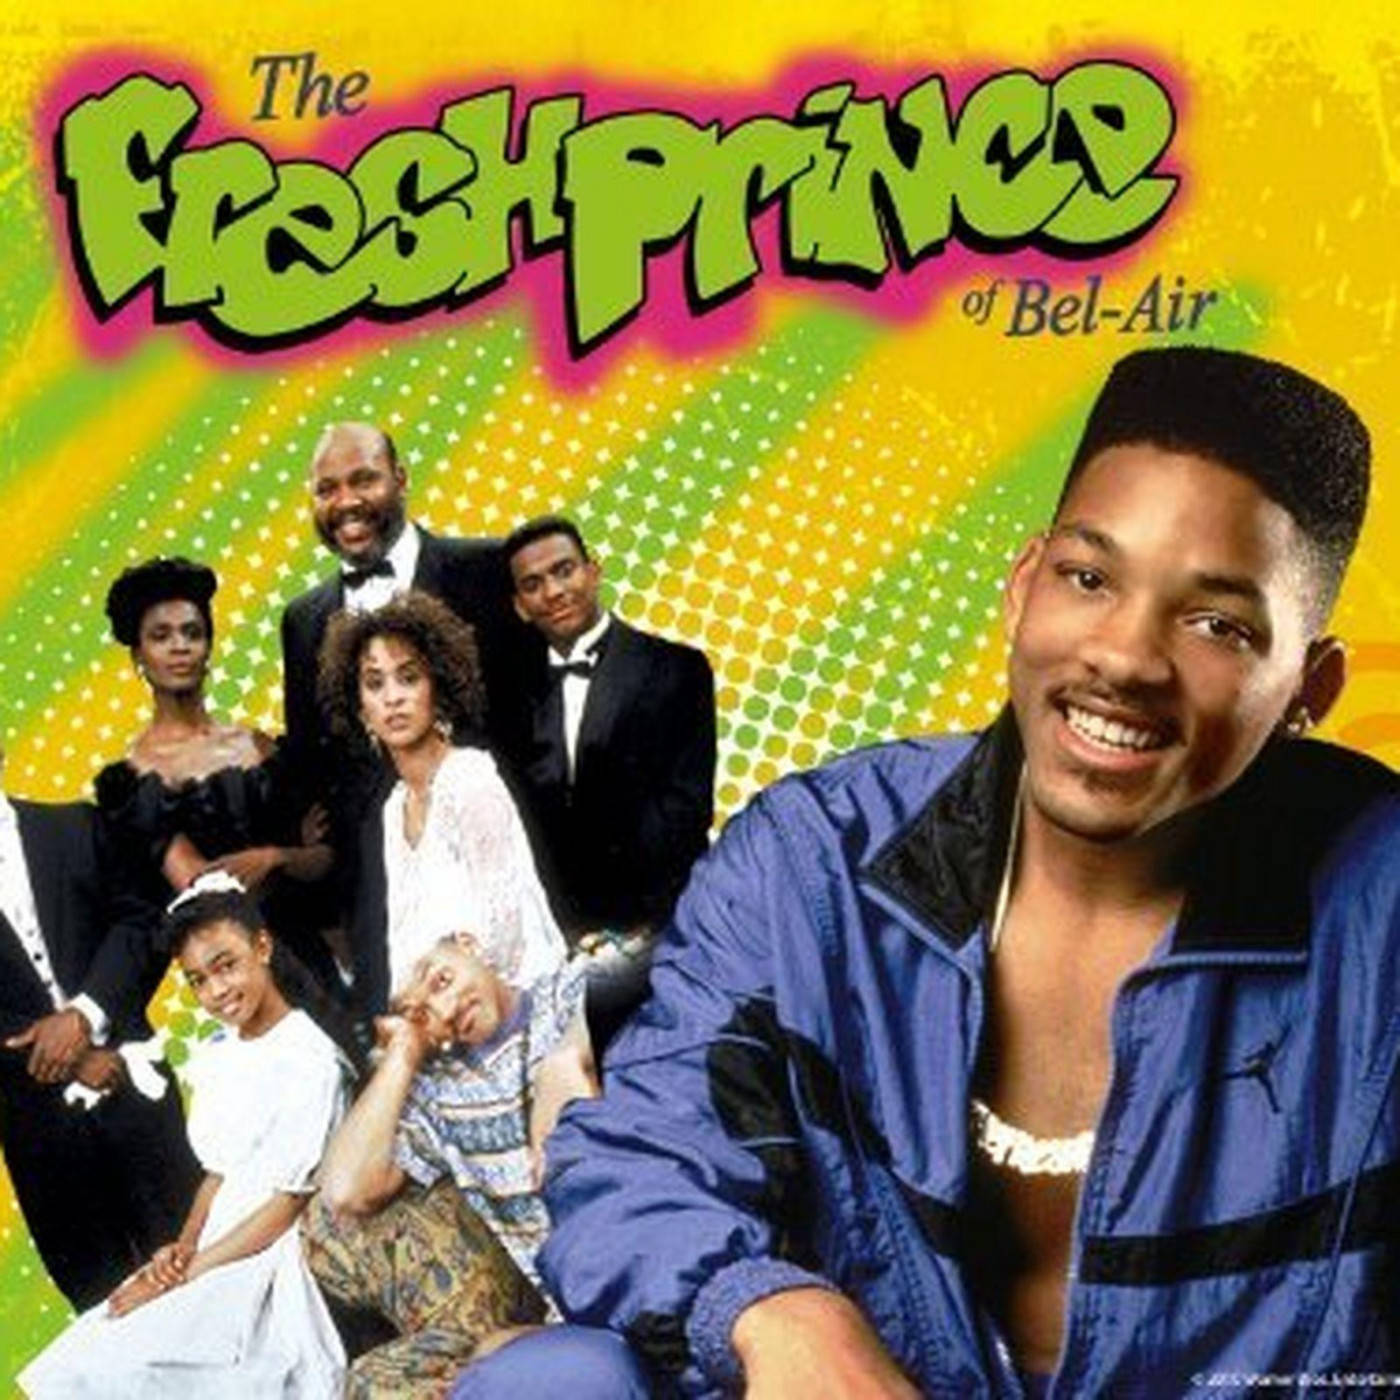 "The Fresh Prince of Bel Air - a show that changed television history." Wallpaper